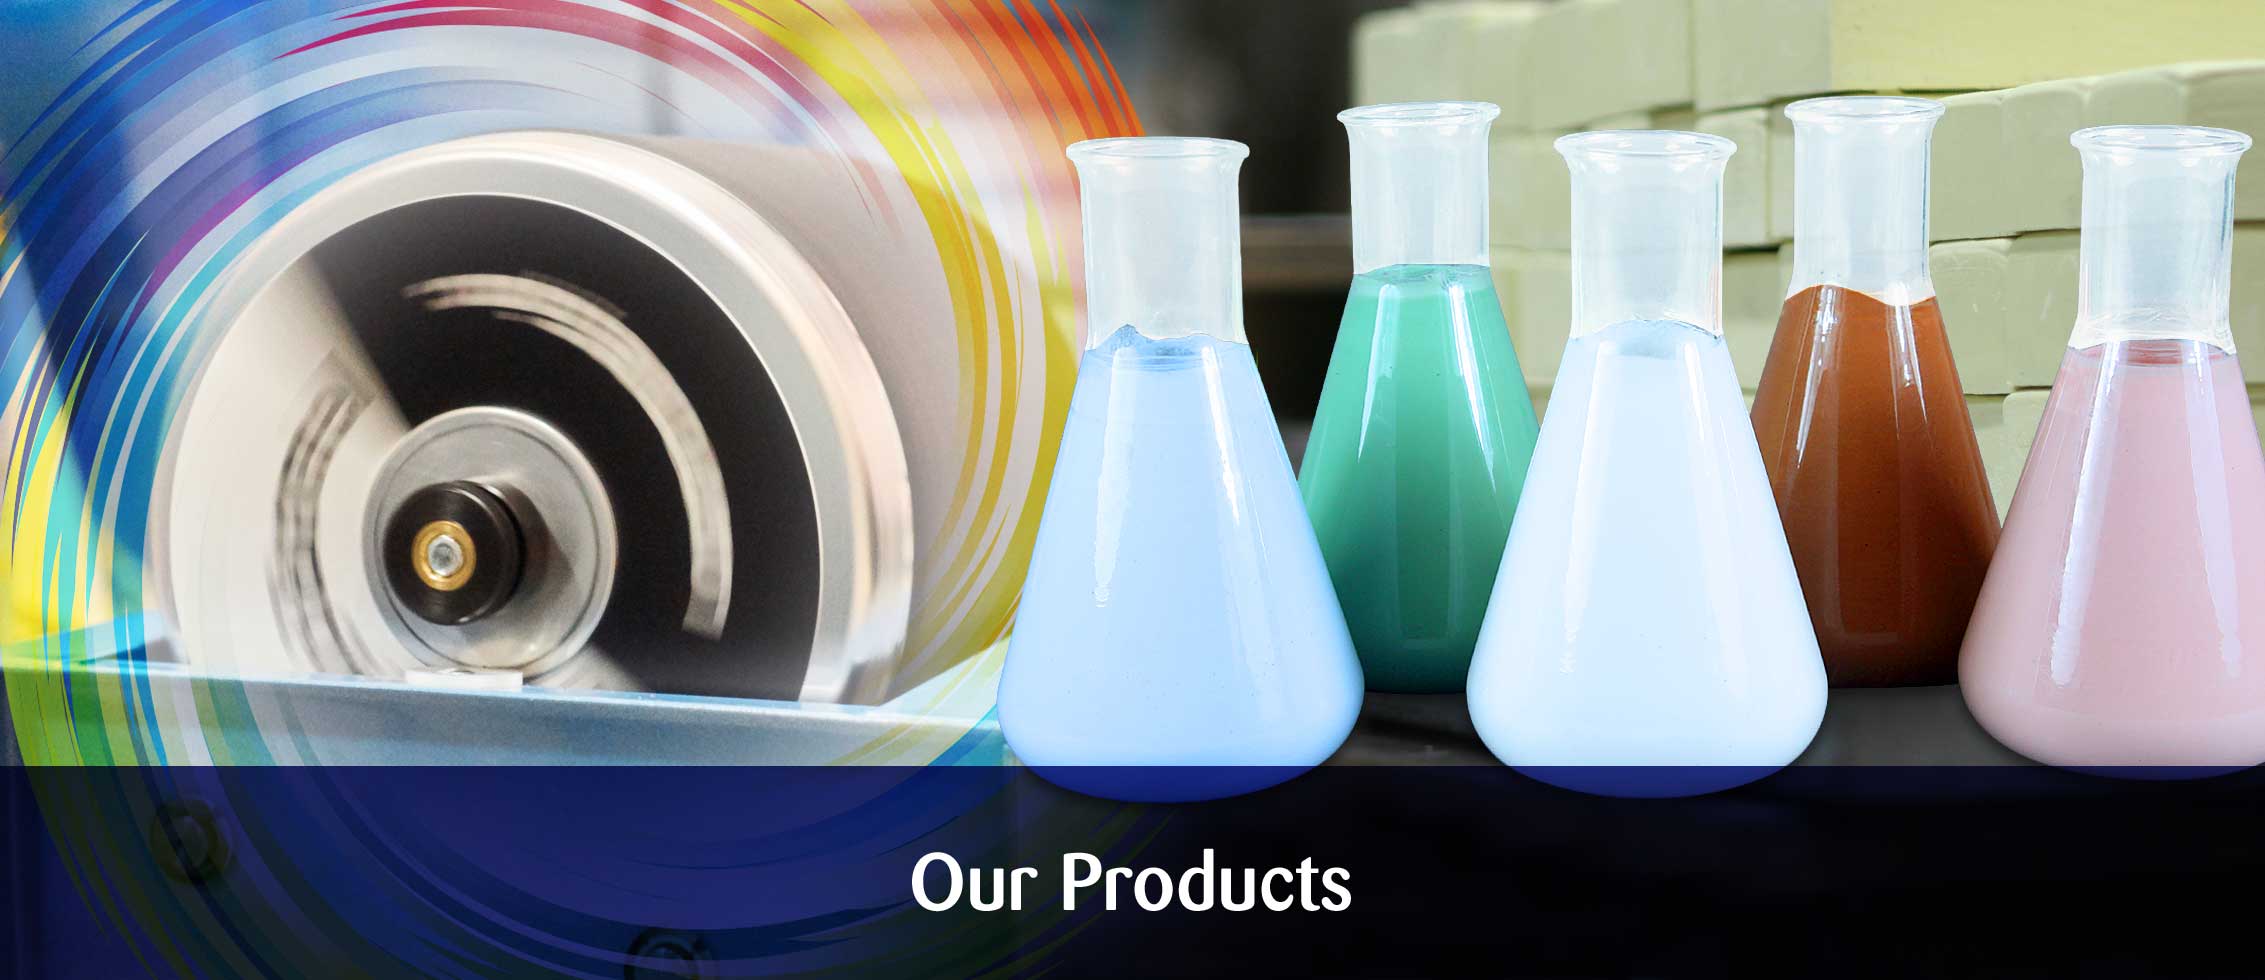 Our Polishing Products